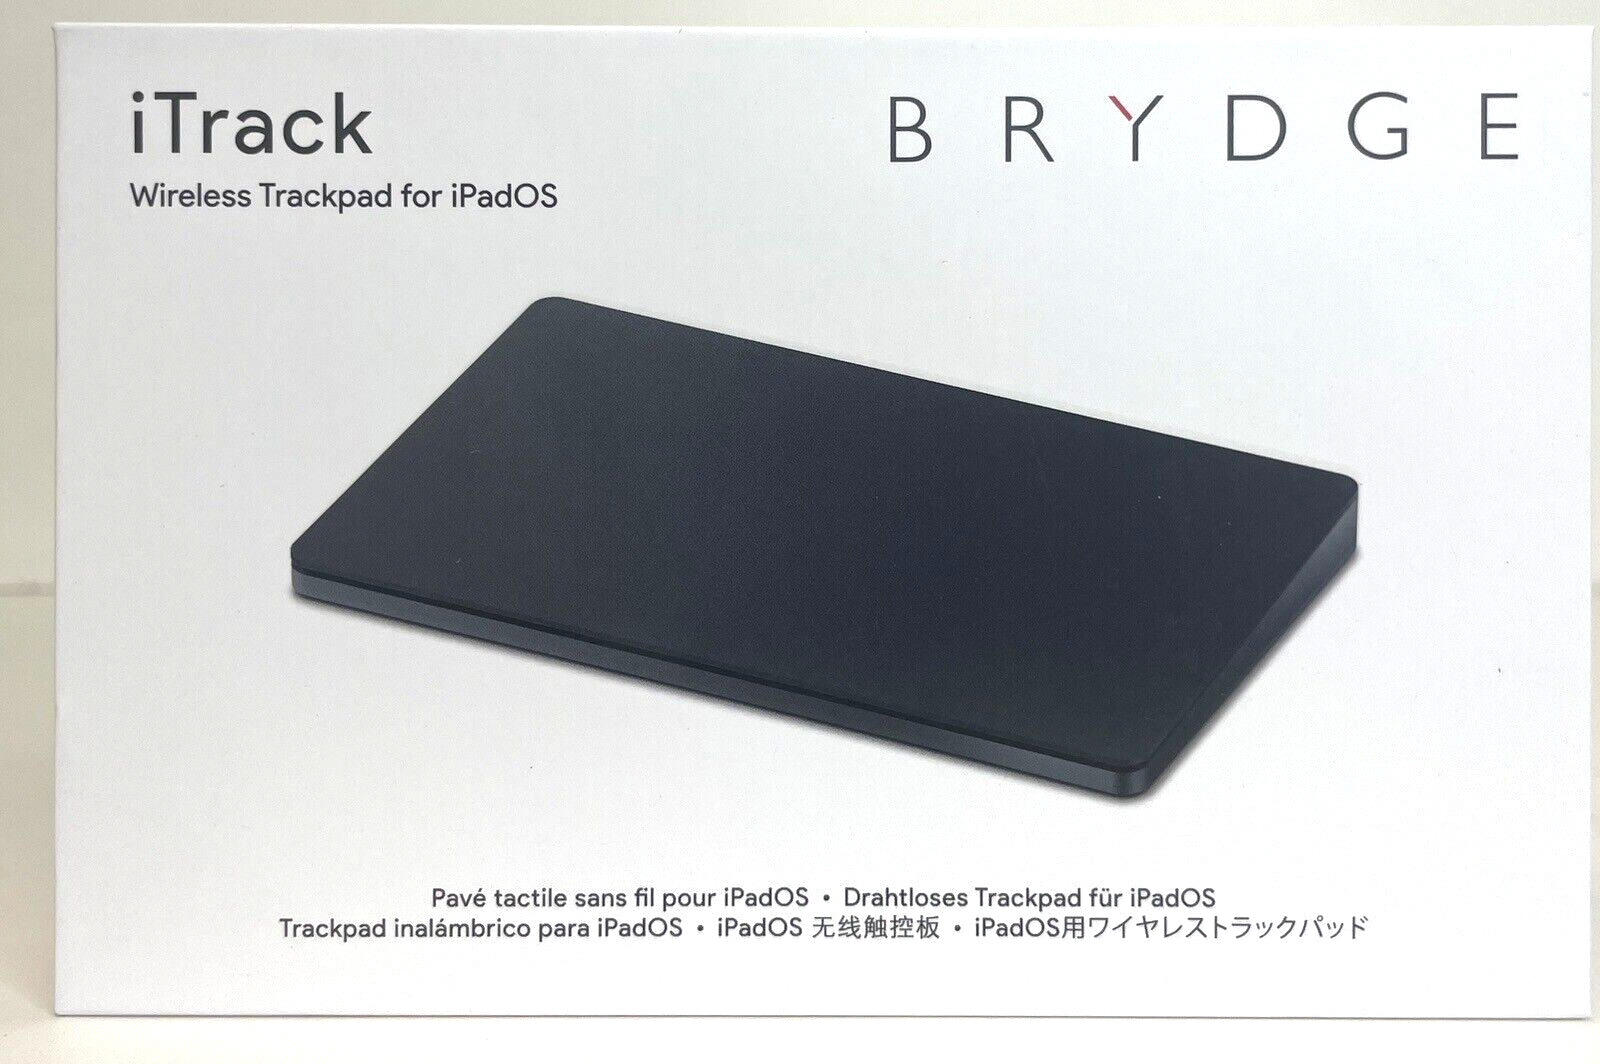 Brydge iTrack Wireless for iPadOS Trackpad BRY2302